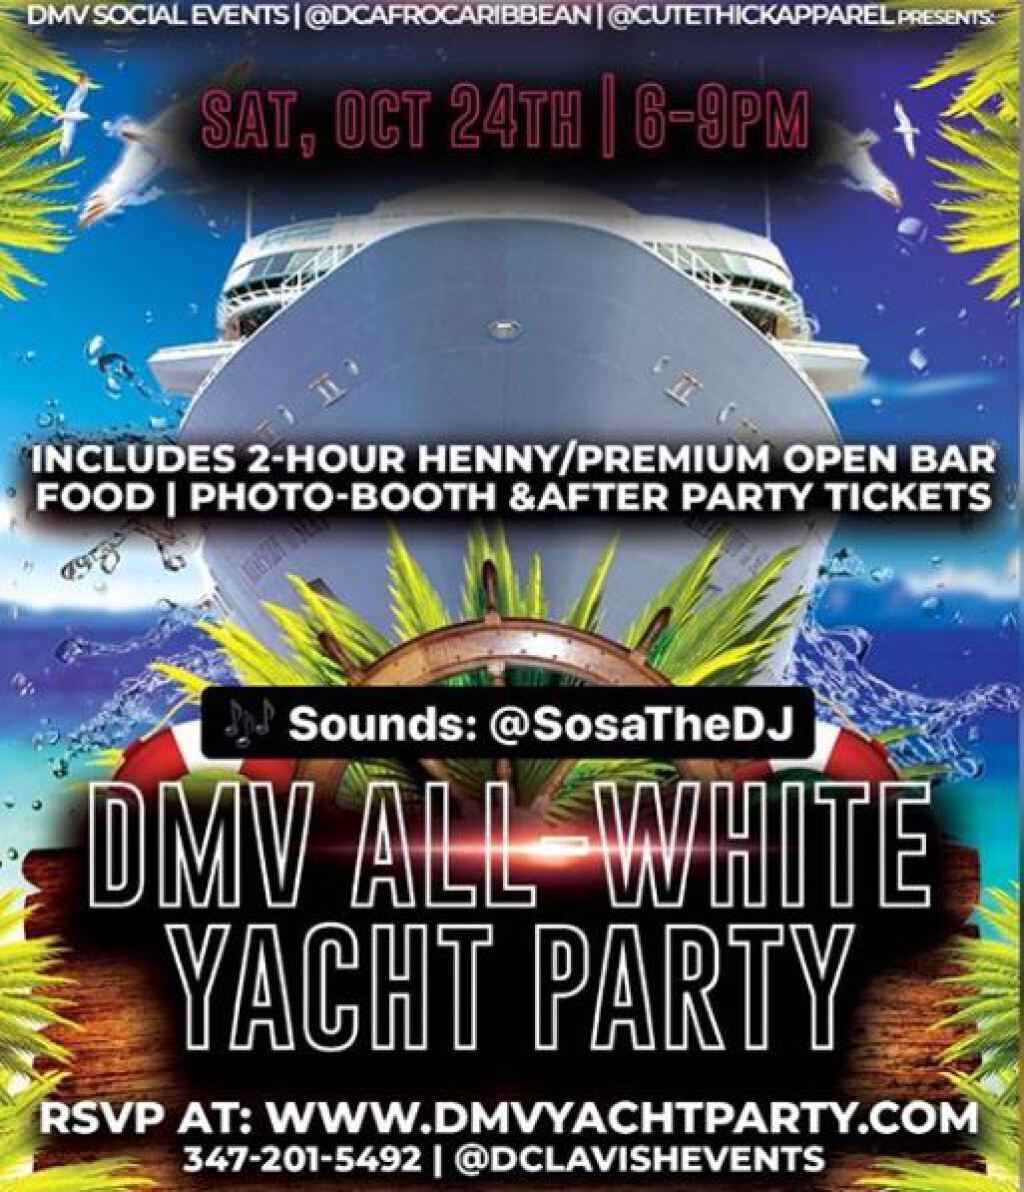 DMV All White Yacht Party flyer or graphic.